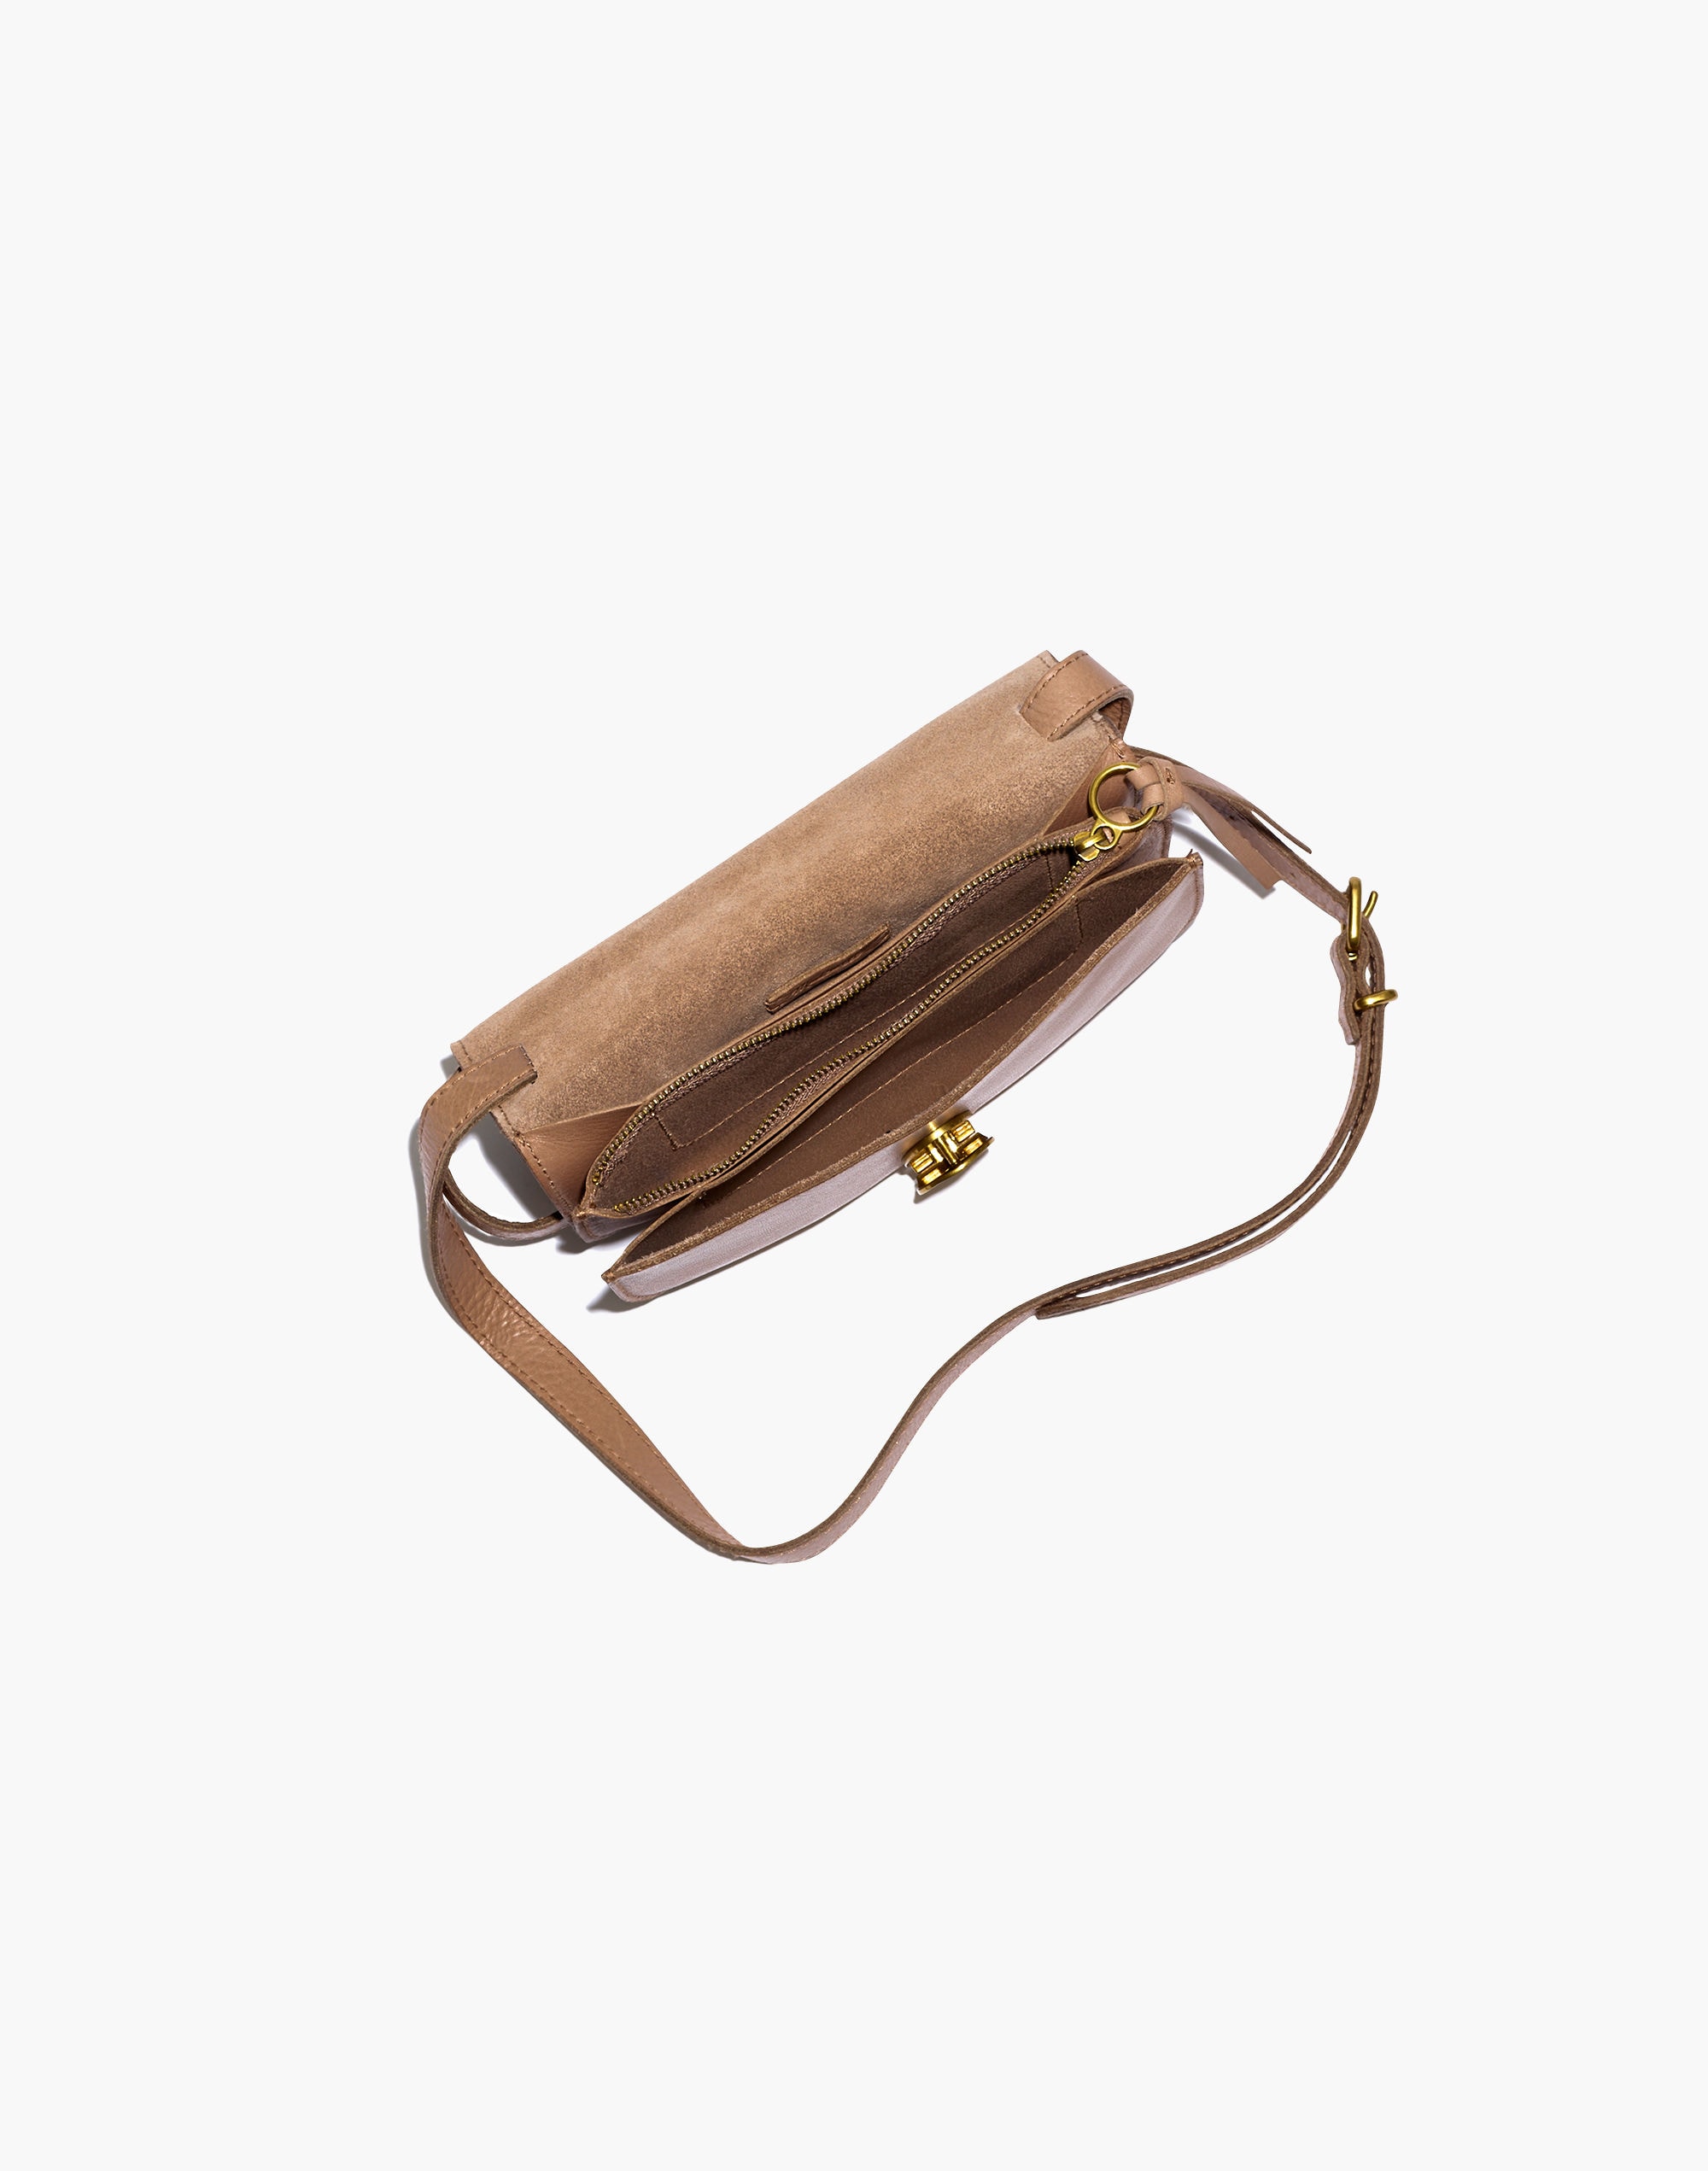 The Abroad Convertible Crossbody Bag in Suede